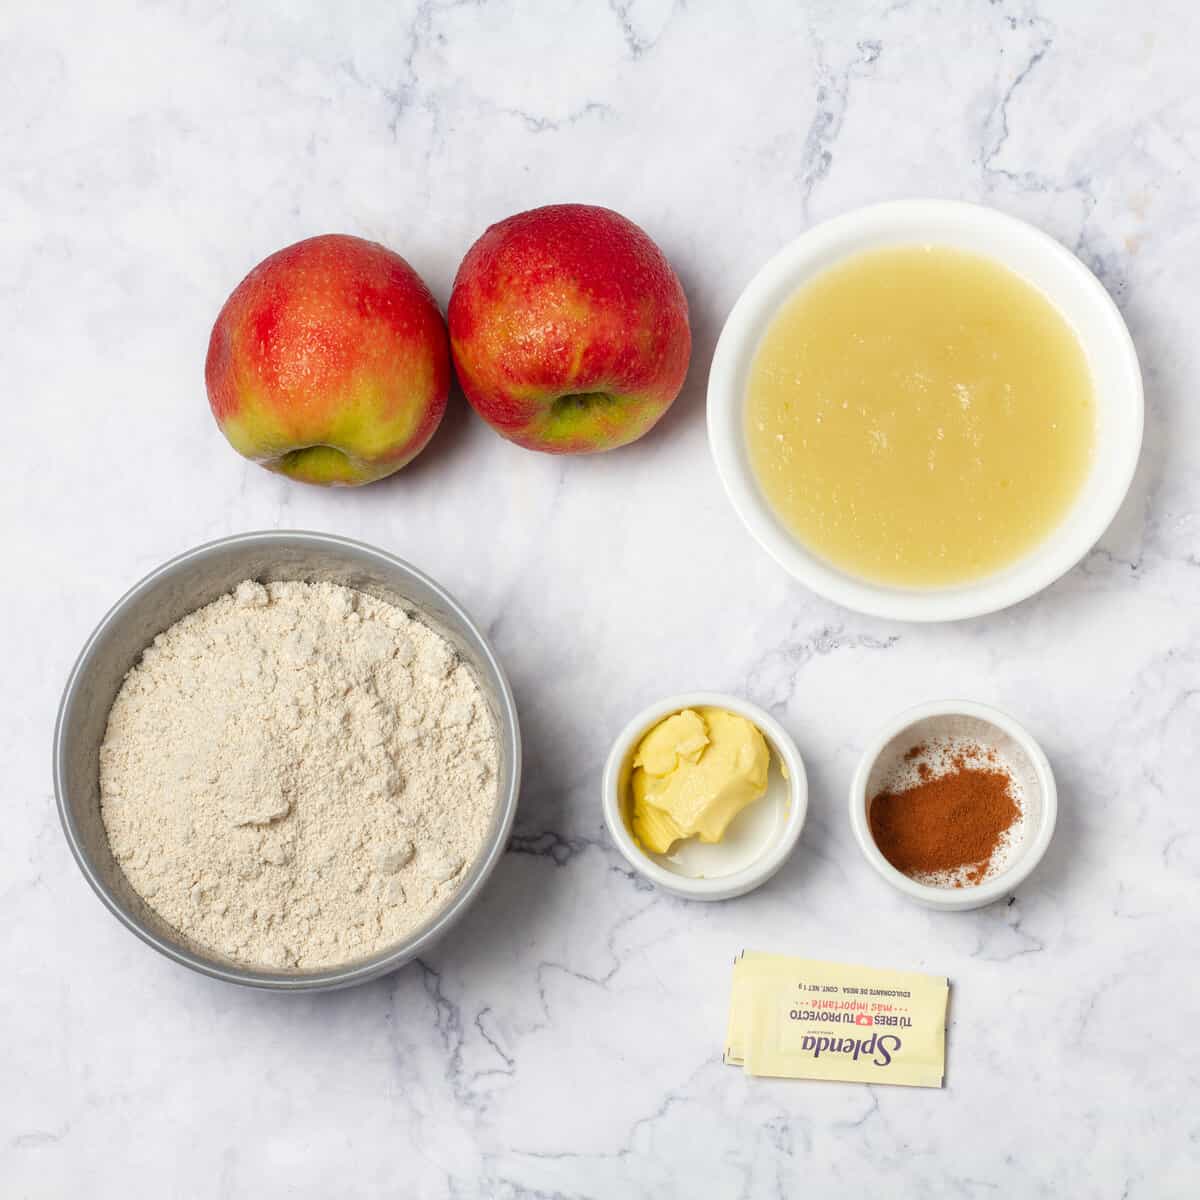 Ingredients of apples, oat flour, butter, sweetener, and spices in separate dishes. 